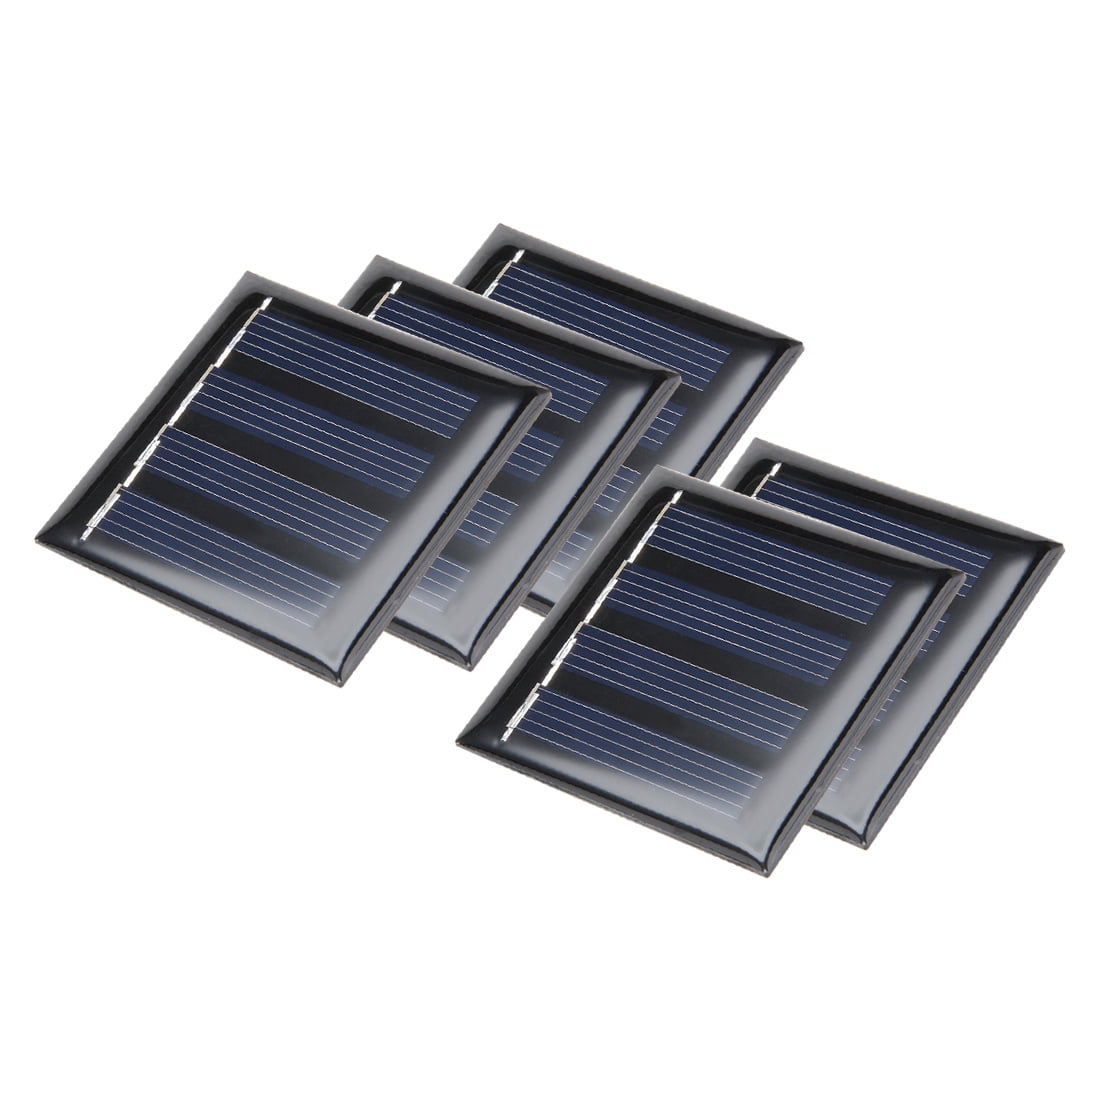 1.5V Mini Solar Panels Module for Small Power System Battery Cell Toys 30x 25mm 